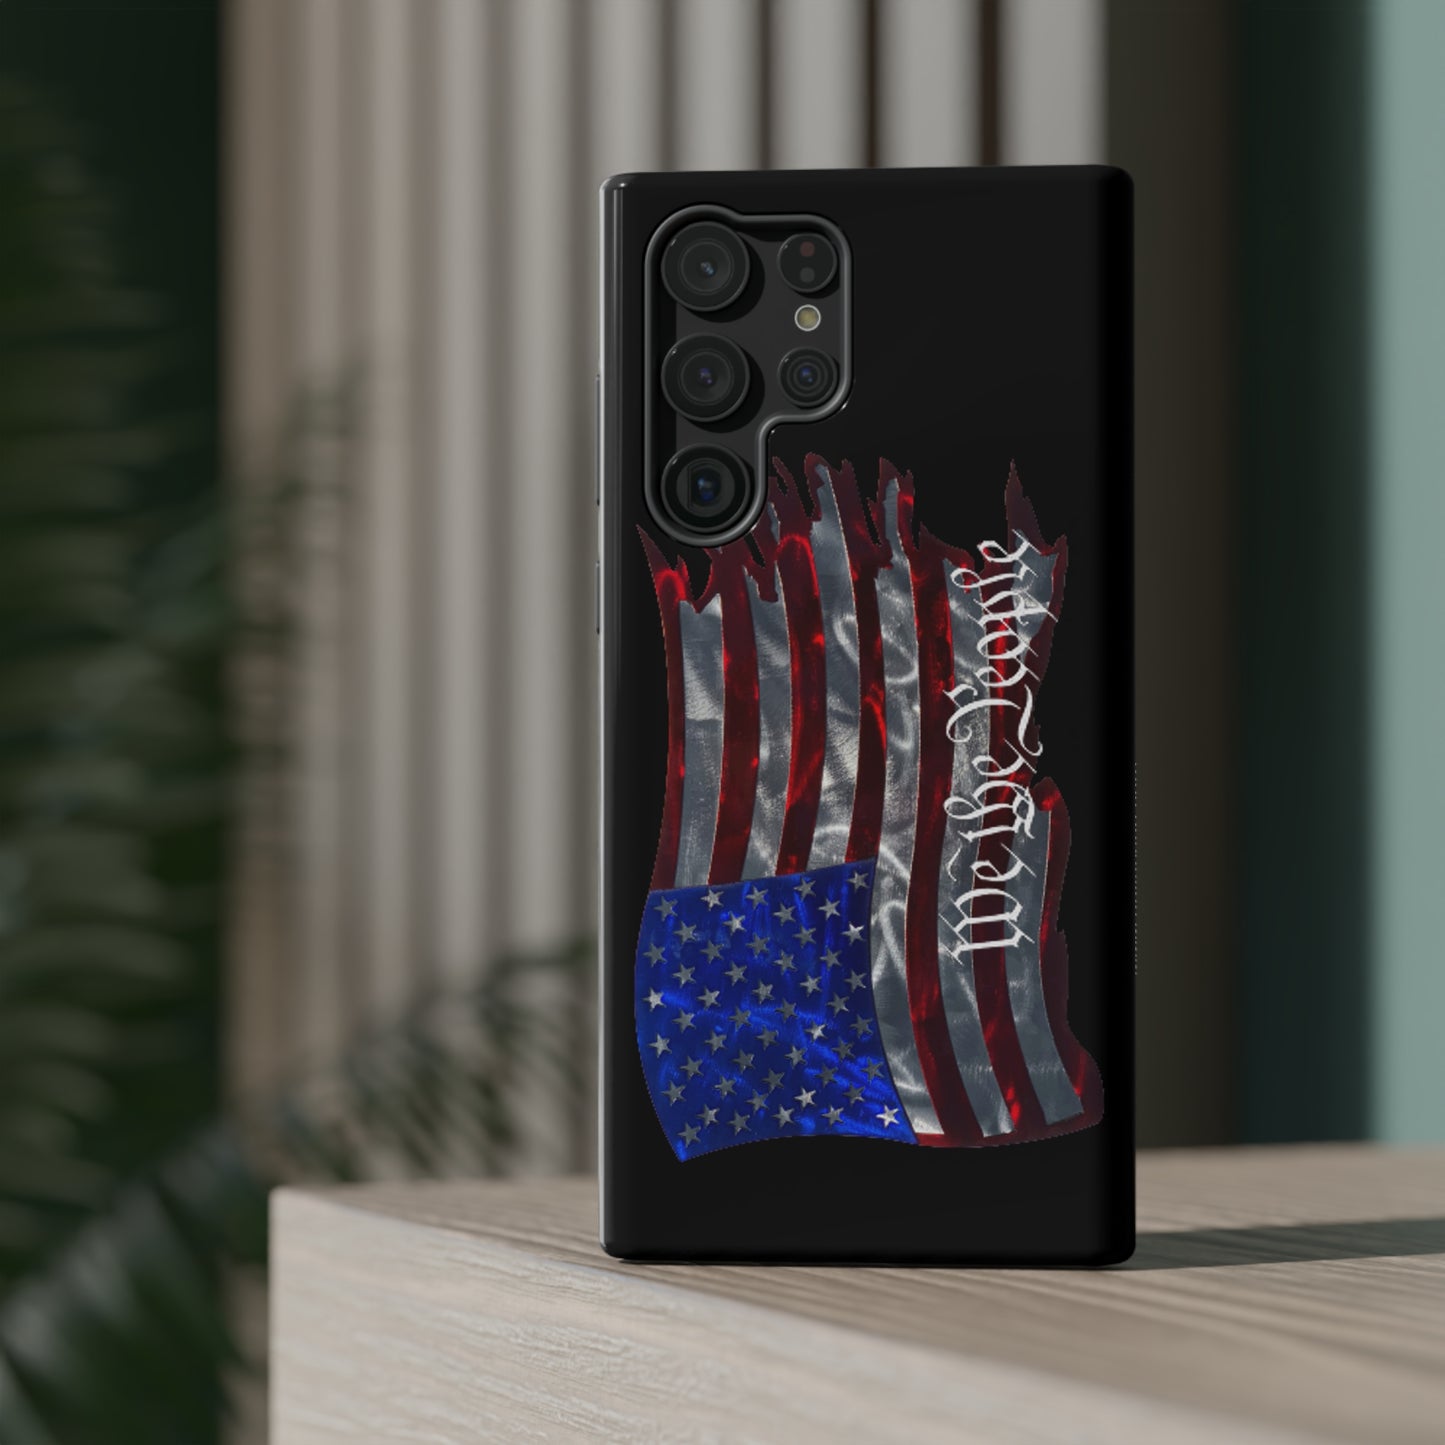 We The People FIVE Impact-Resistant Cases